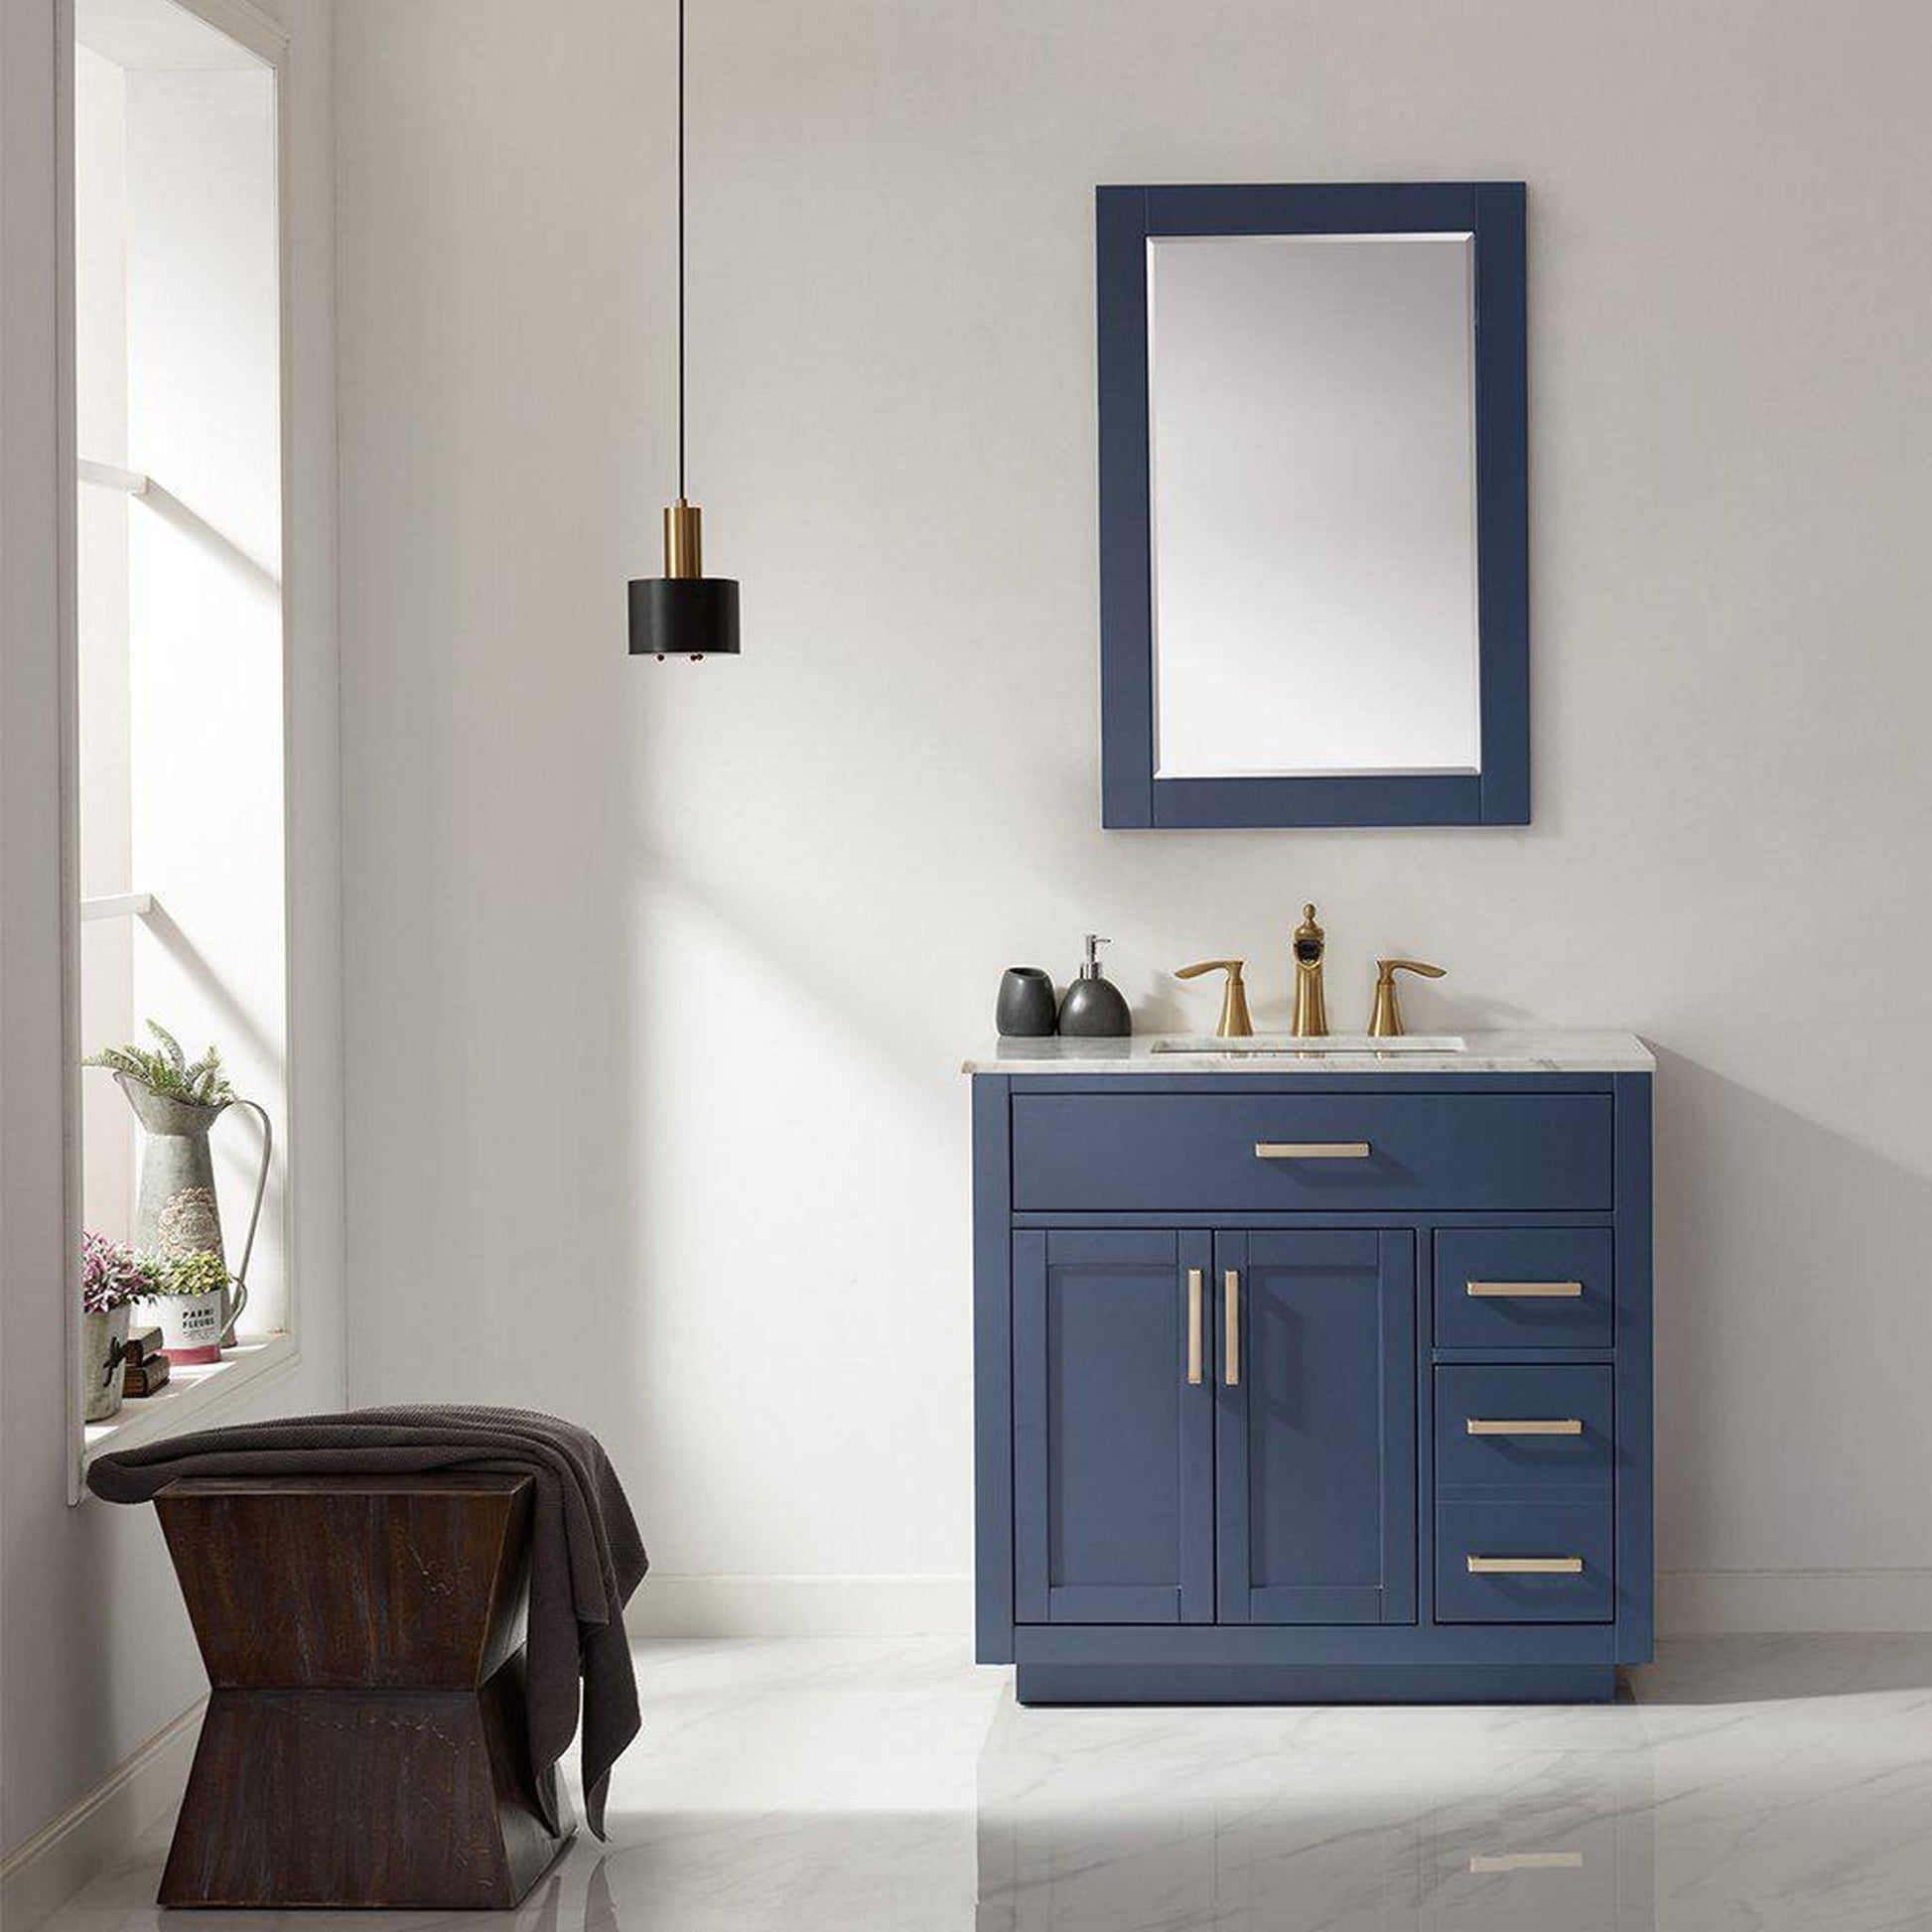 Altair Ivy 36" Single Royal Blue Freestanding Bathroom Vanity Set With Mirror, Natural Carrara White Marble Top, Rectangular Undermount Ceramic Sink, and Overflow